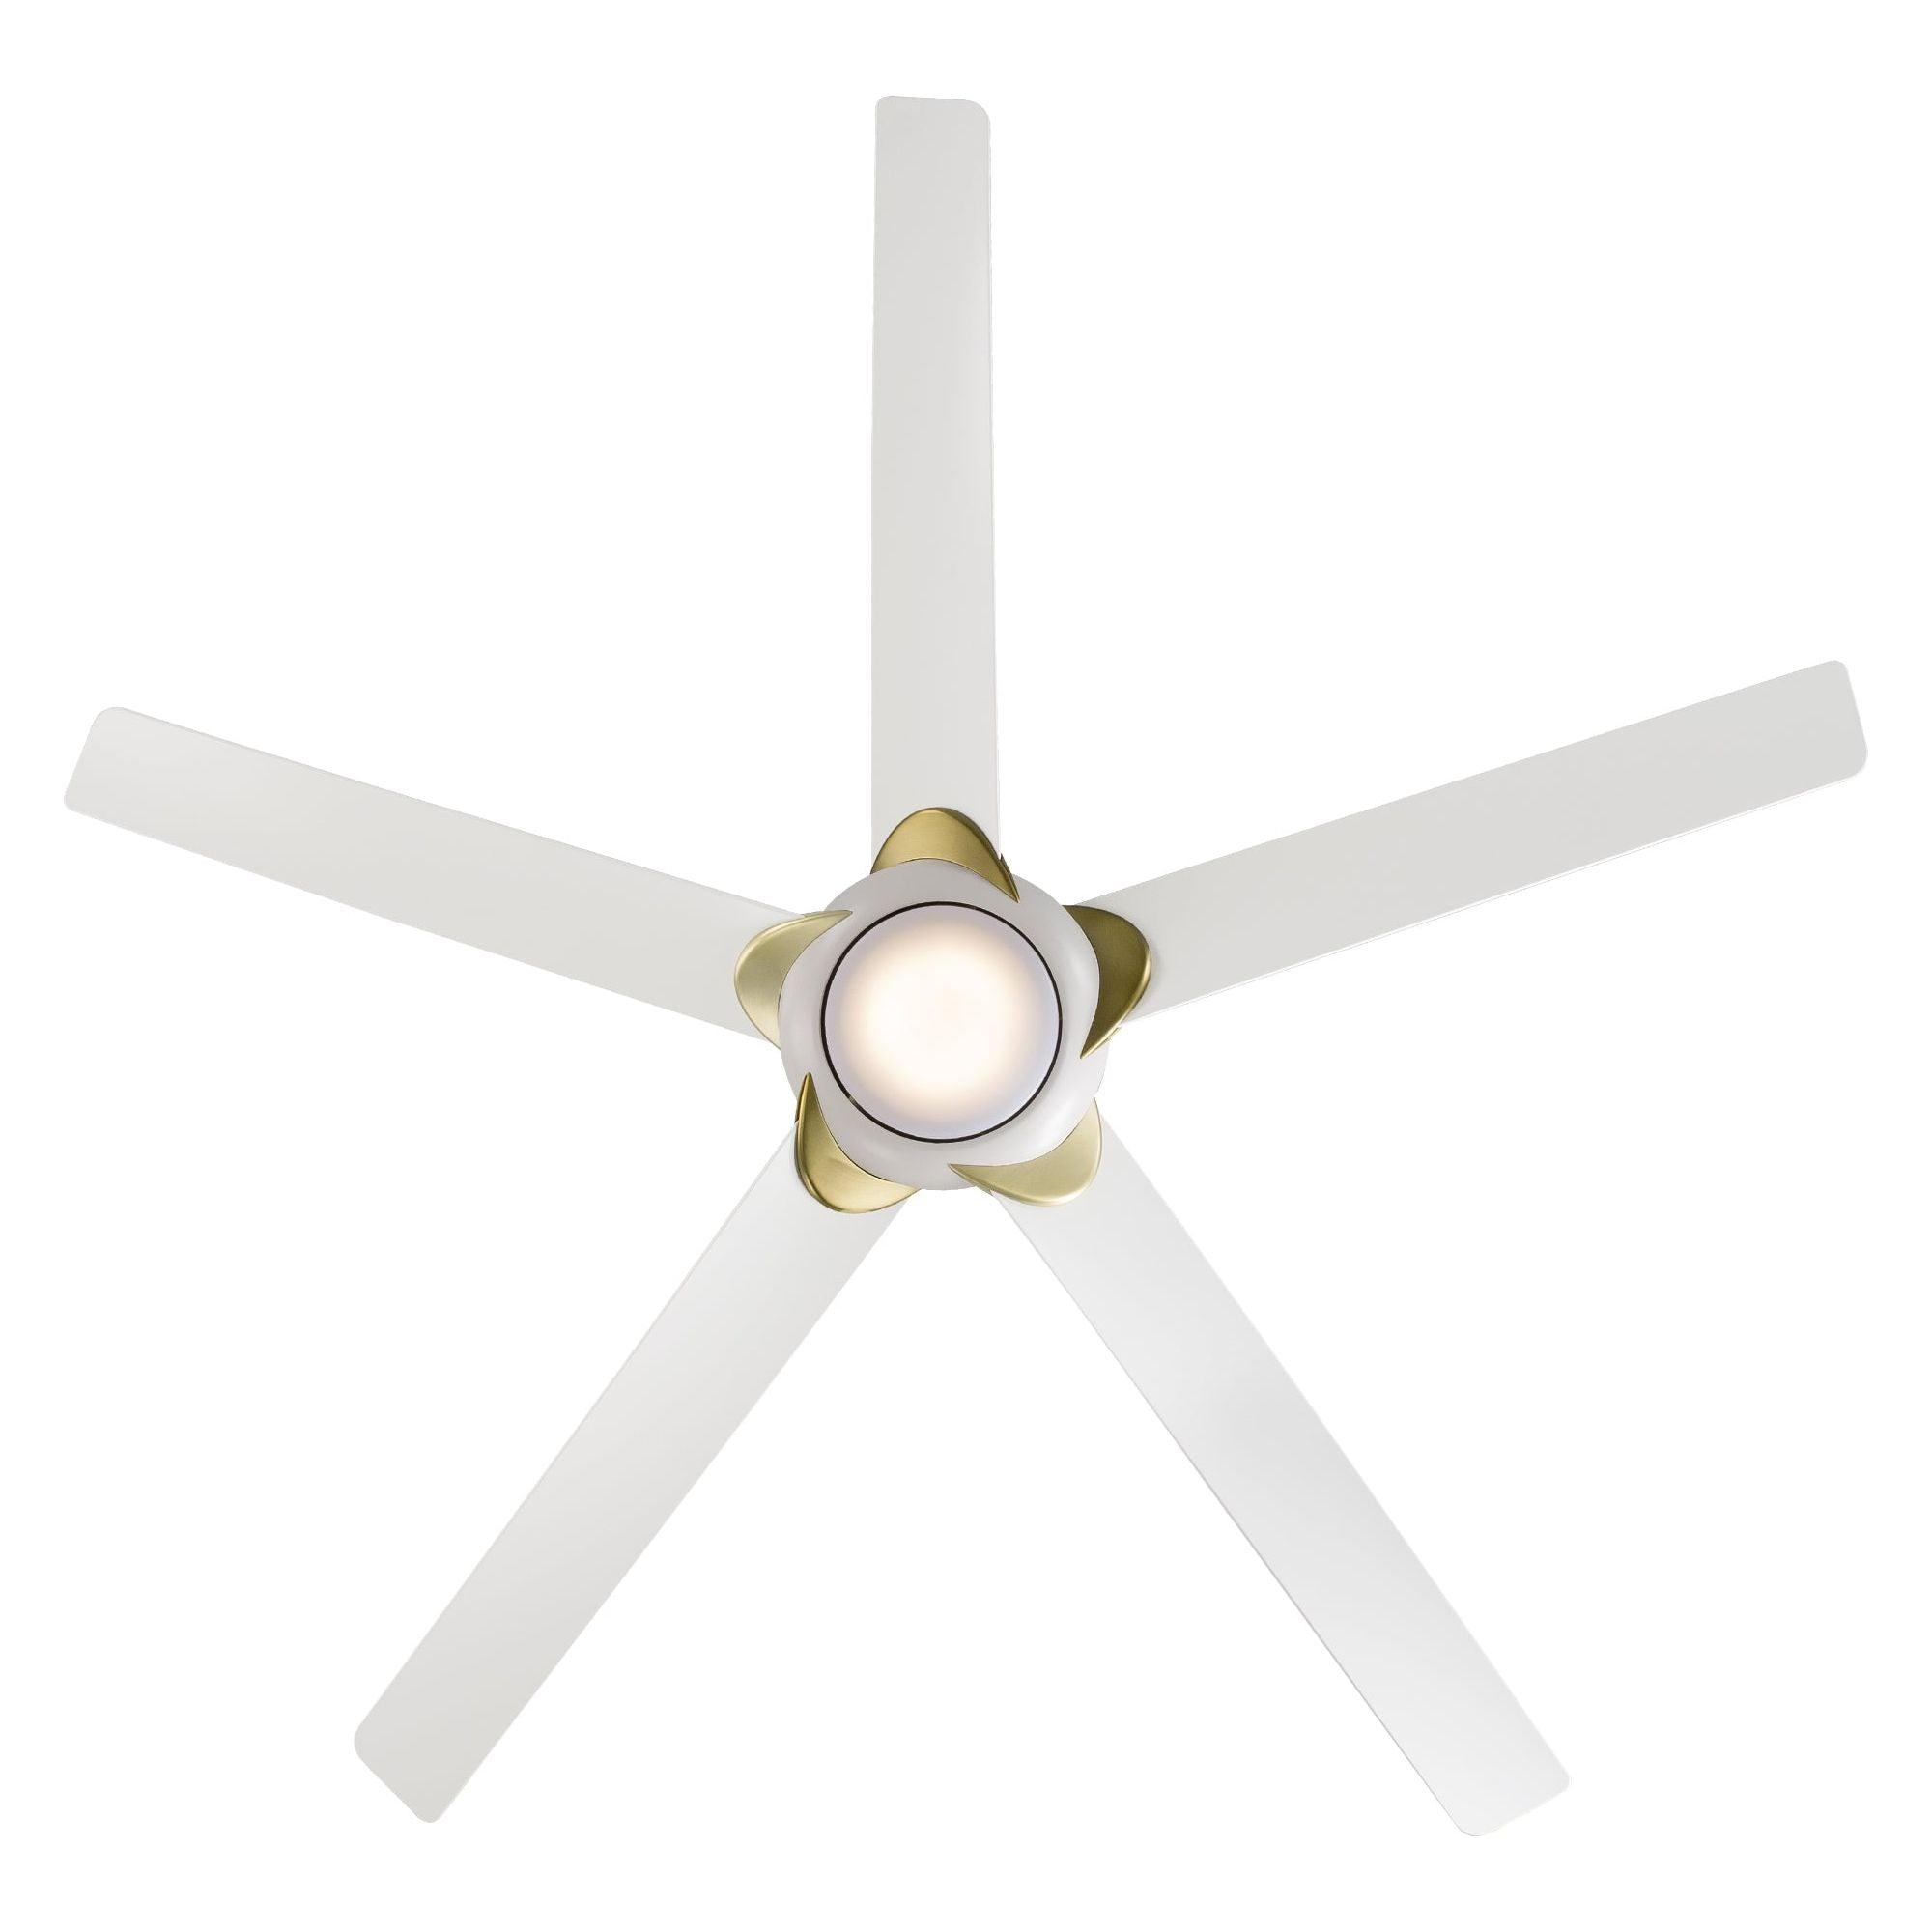 Modern Forms - Lucid Indoor/Outdoor 5-Blade 62" Smart Ceiling Fan with LED Light Kit and Remote Control - Lights Canada